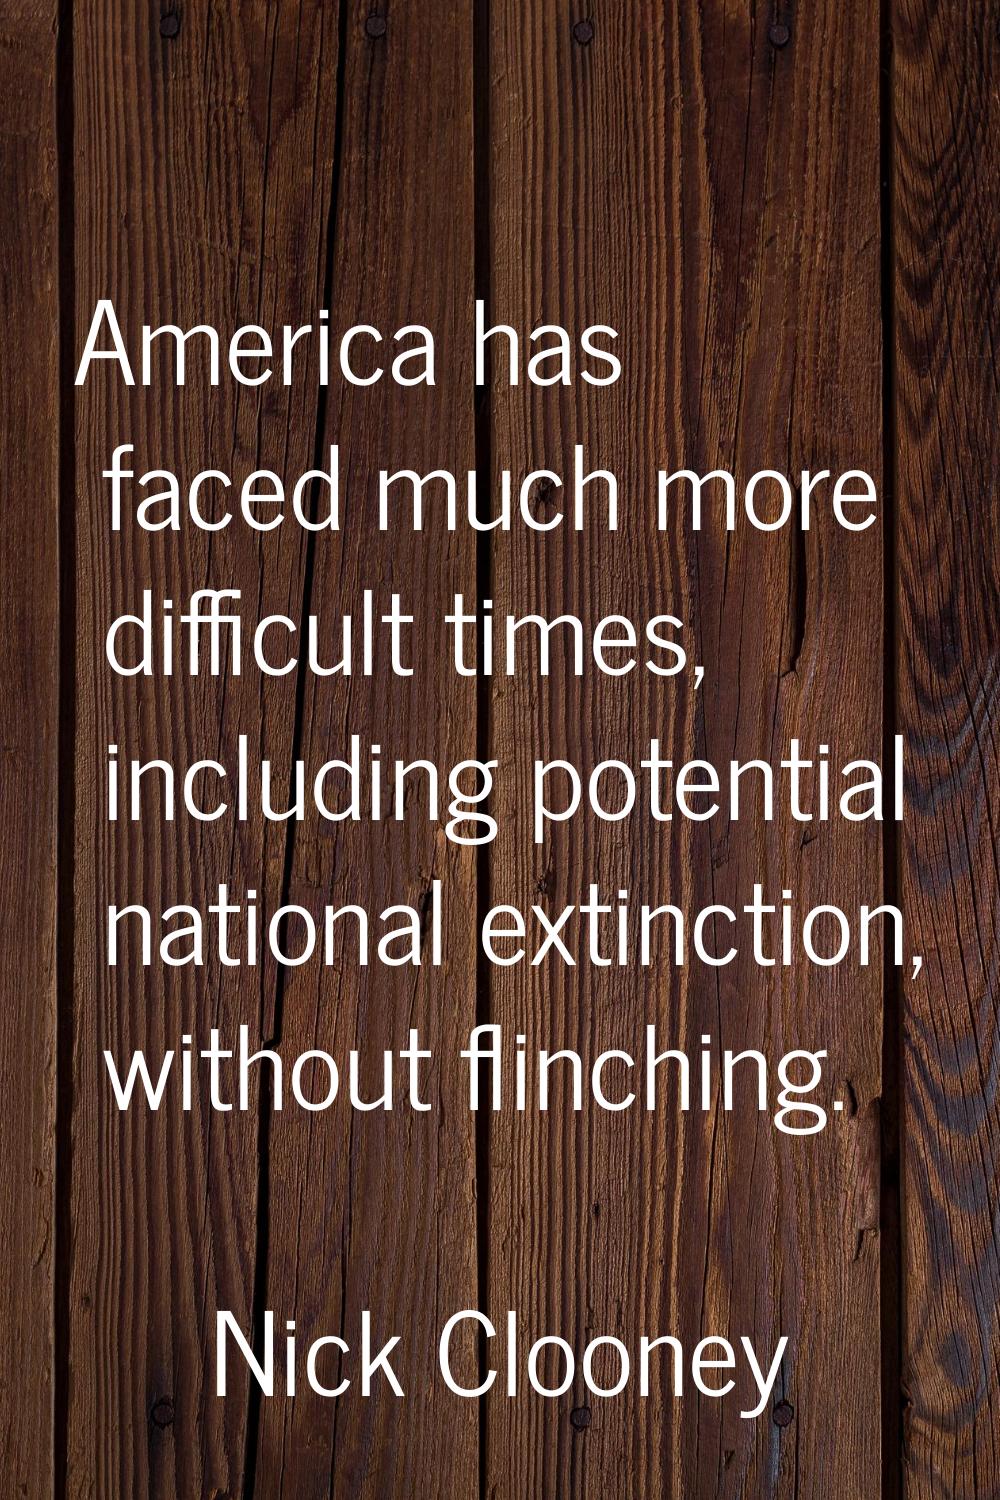 America has faced much more difficult times, including potential national extinction, without flinc